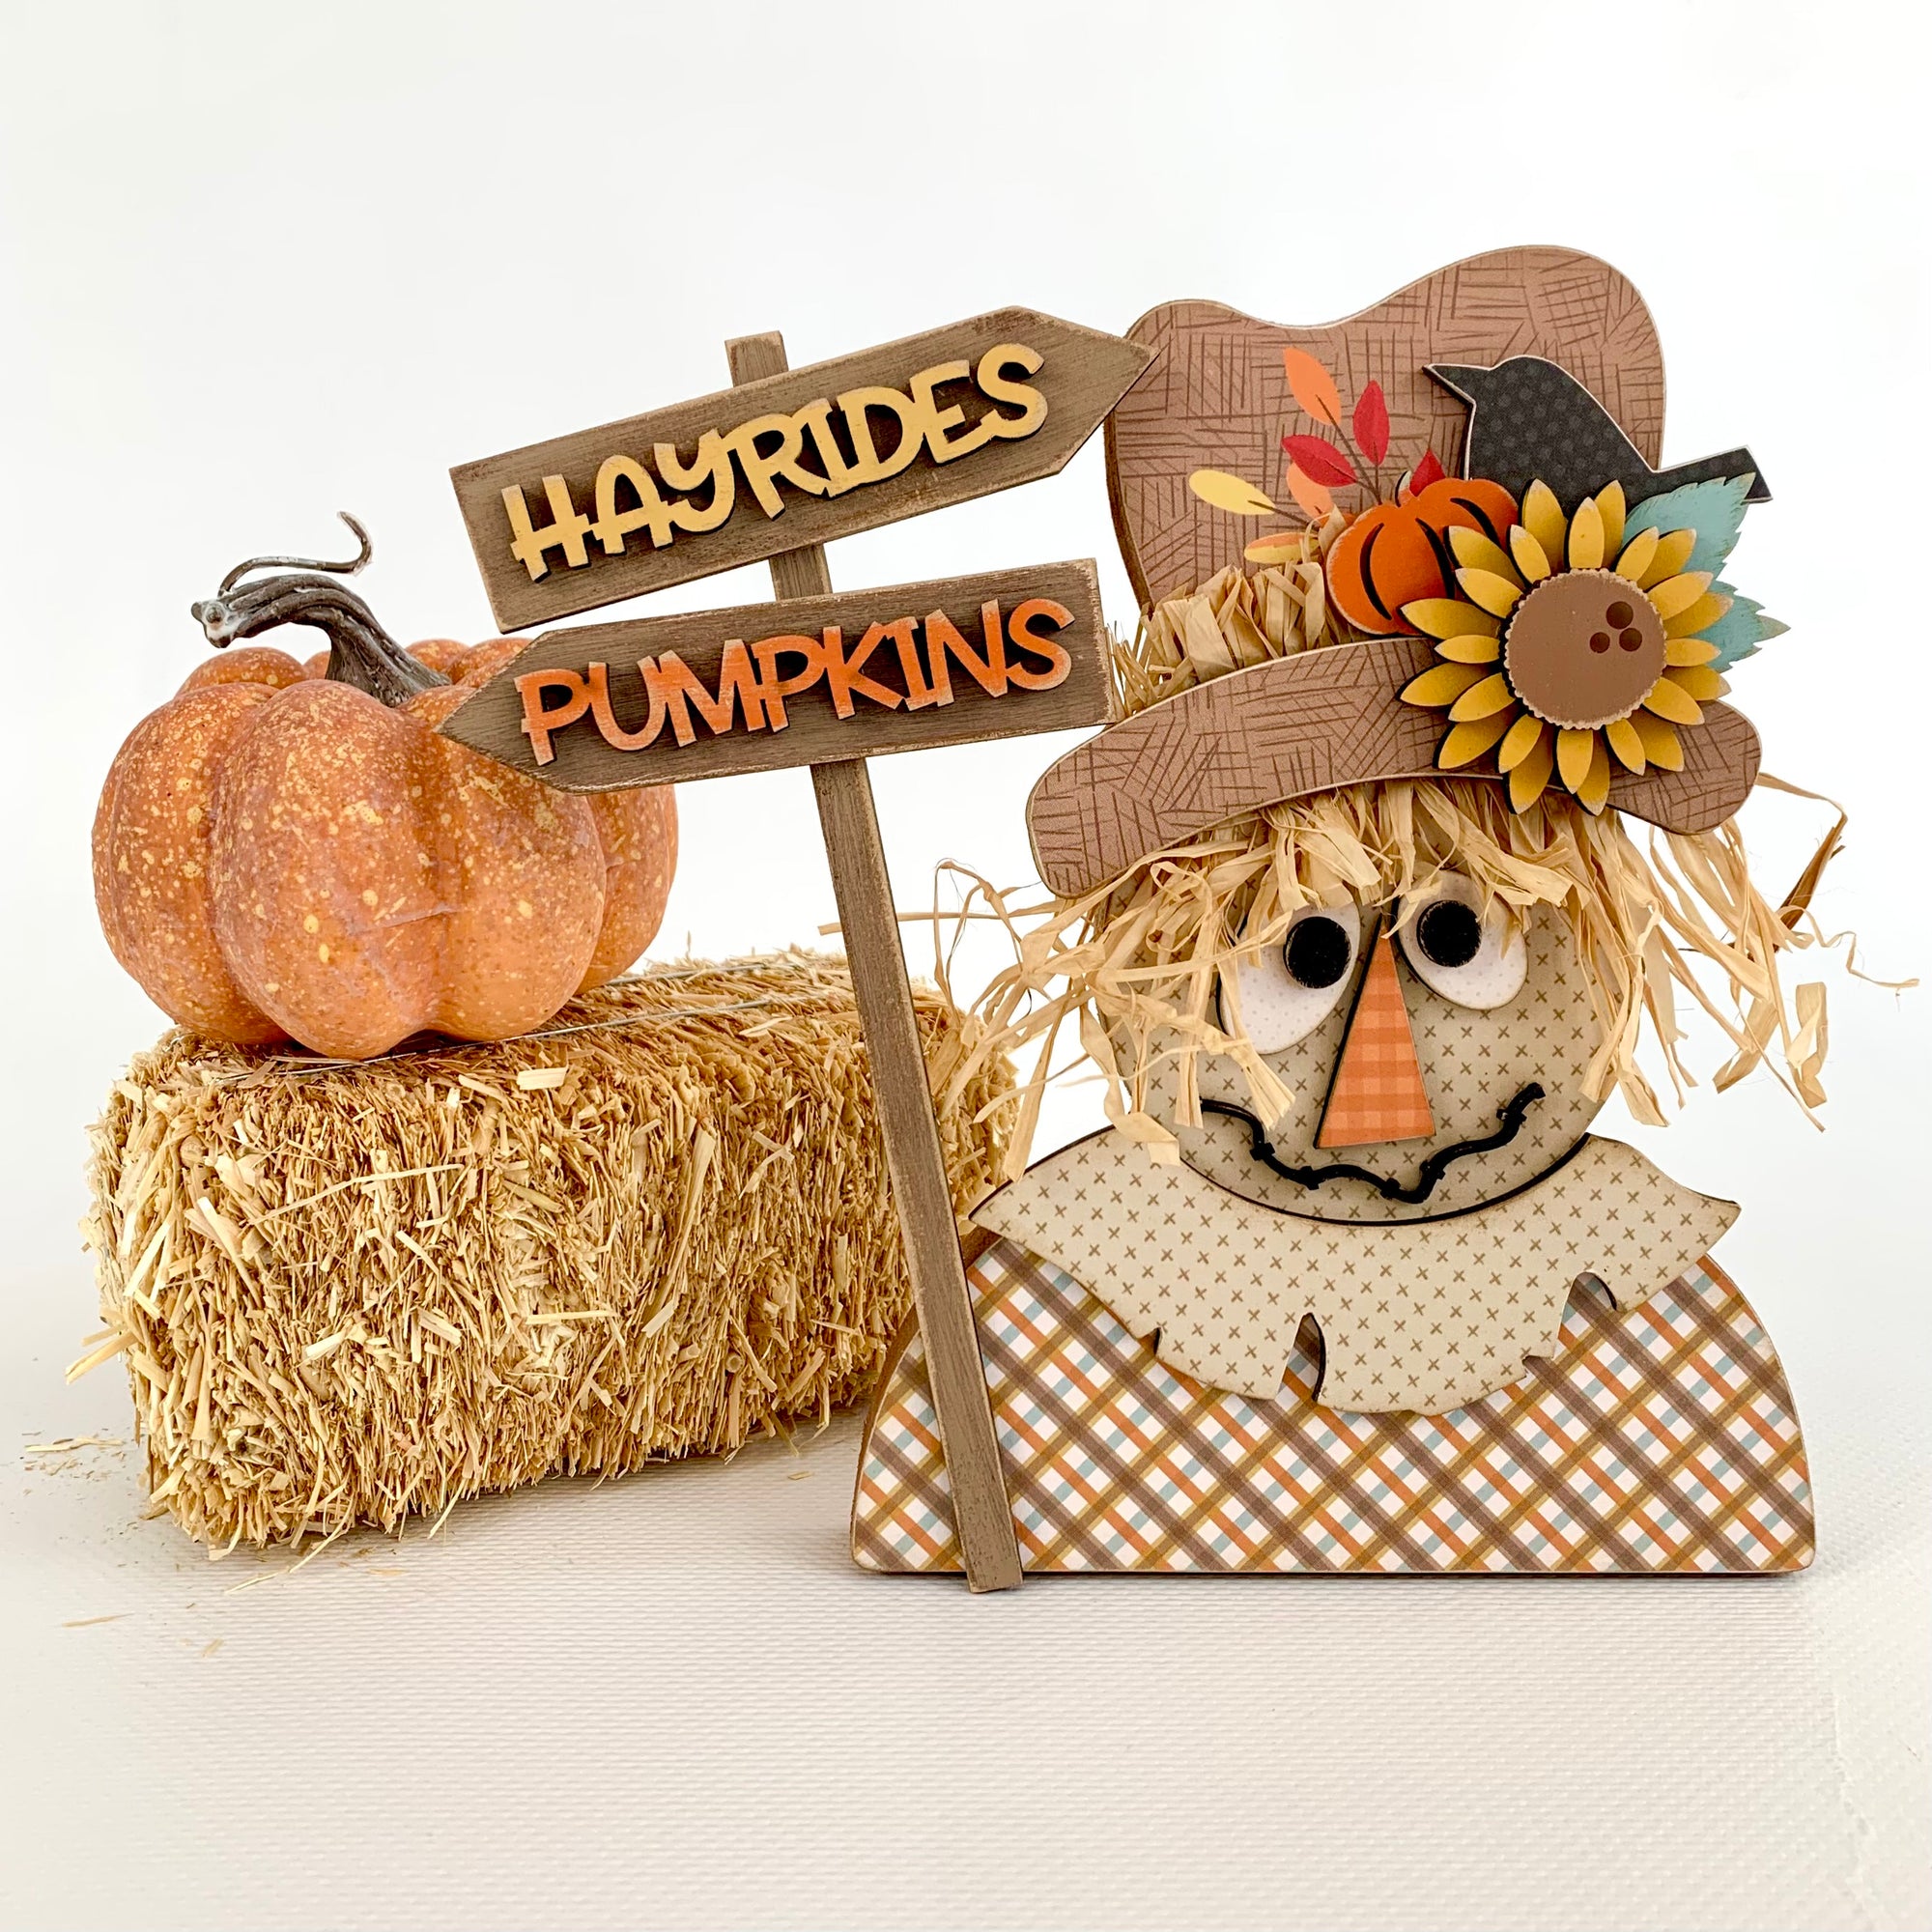 Wood scarecrow home decor DIY kit for tiered trays, shelves, and mantels.  Scarecrow holding a pumpkins and hayrides sign.  Fall wood decor decorations.  Thanksgiving scarecrow decoration.